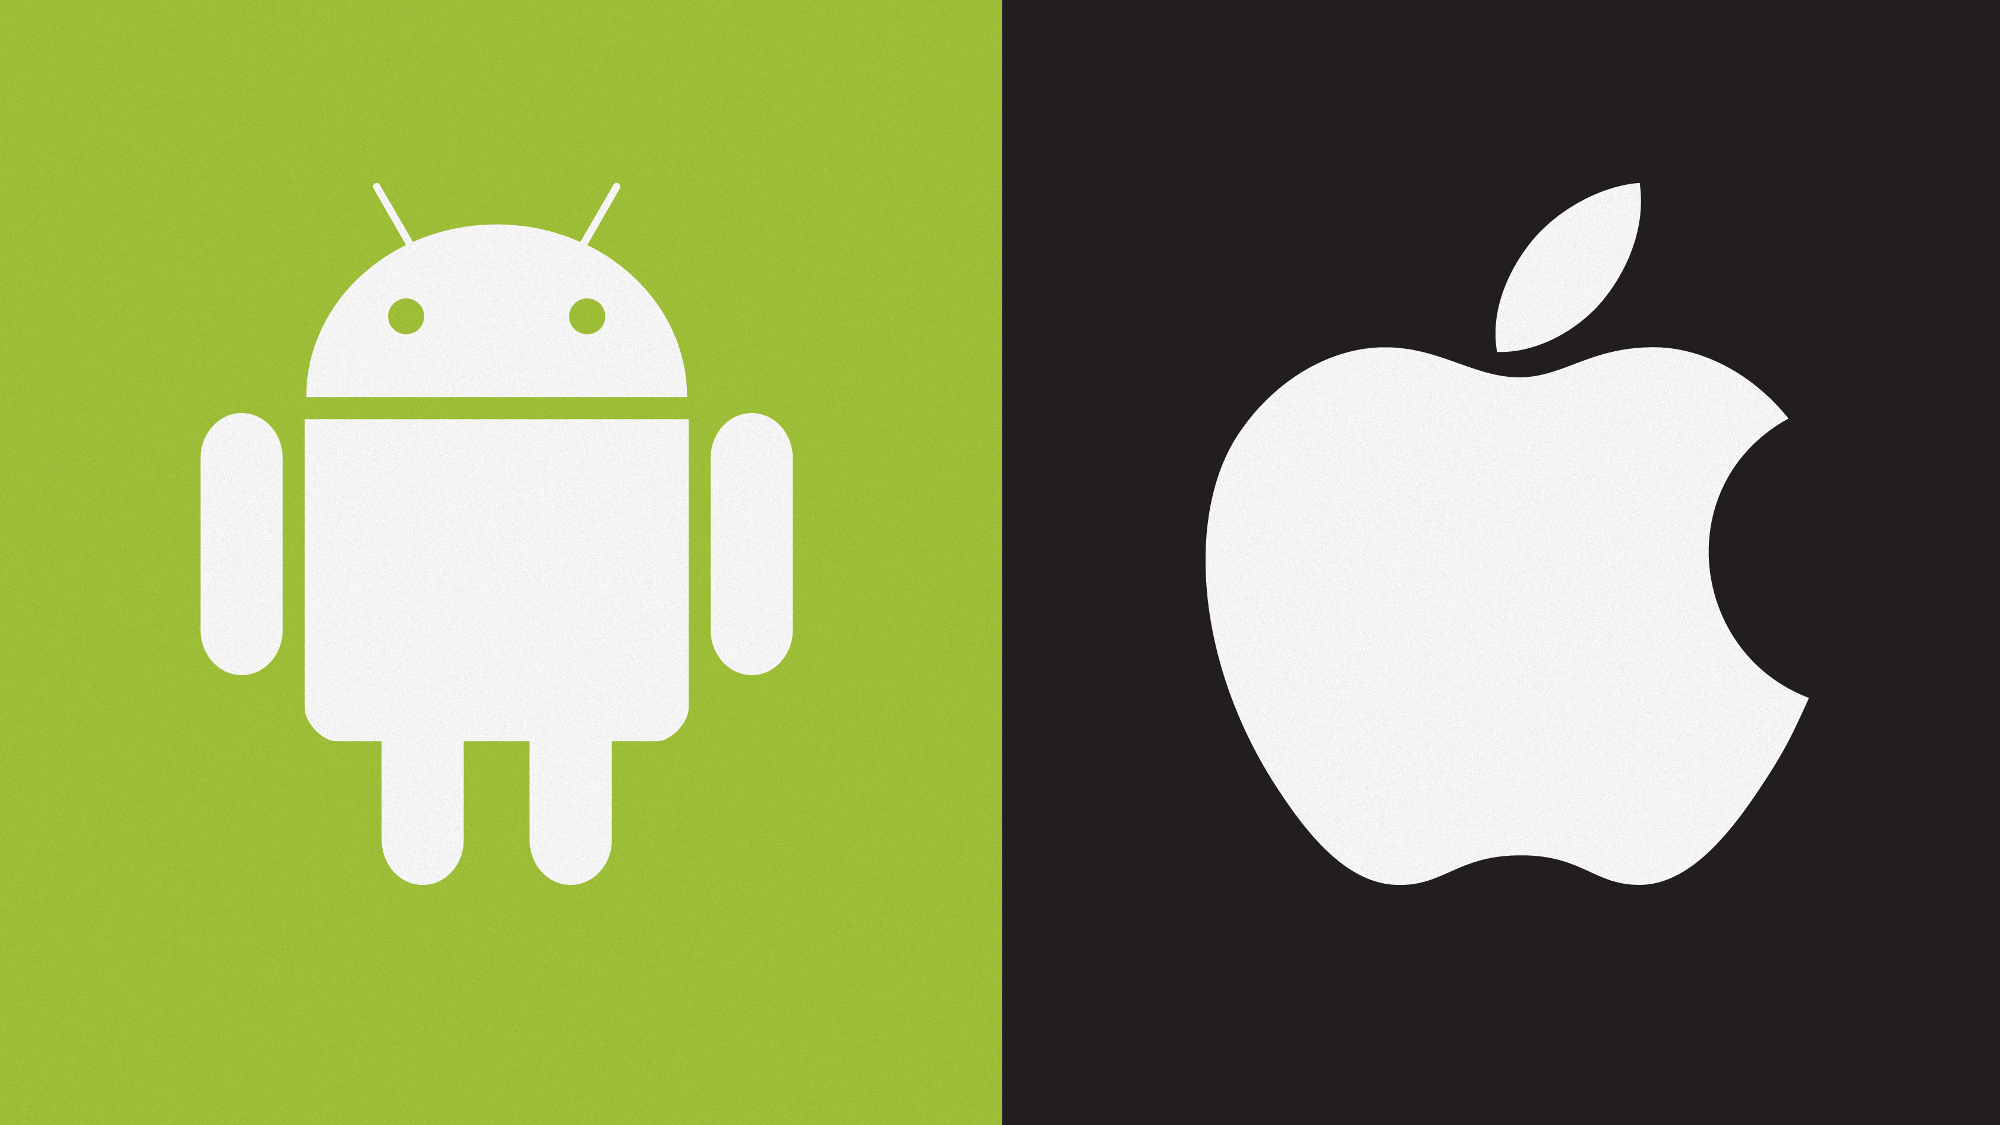 Mobile Operating Systems: A Comparison of Android and iOS